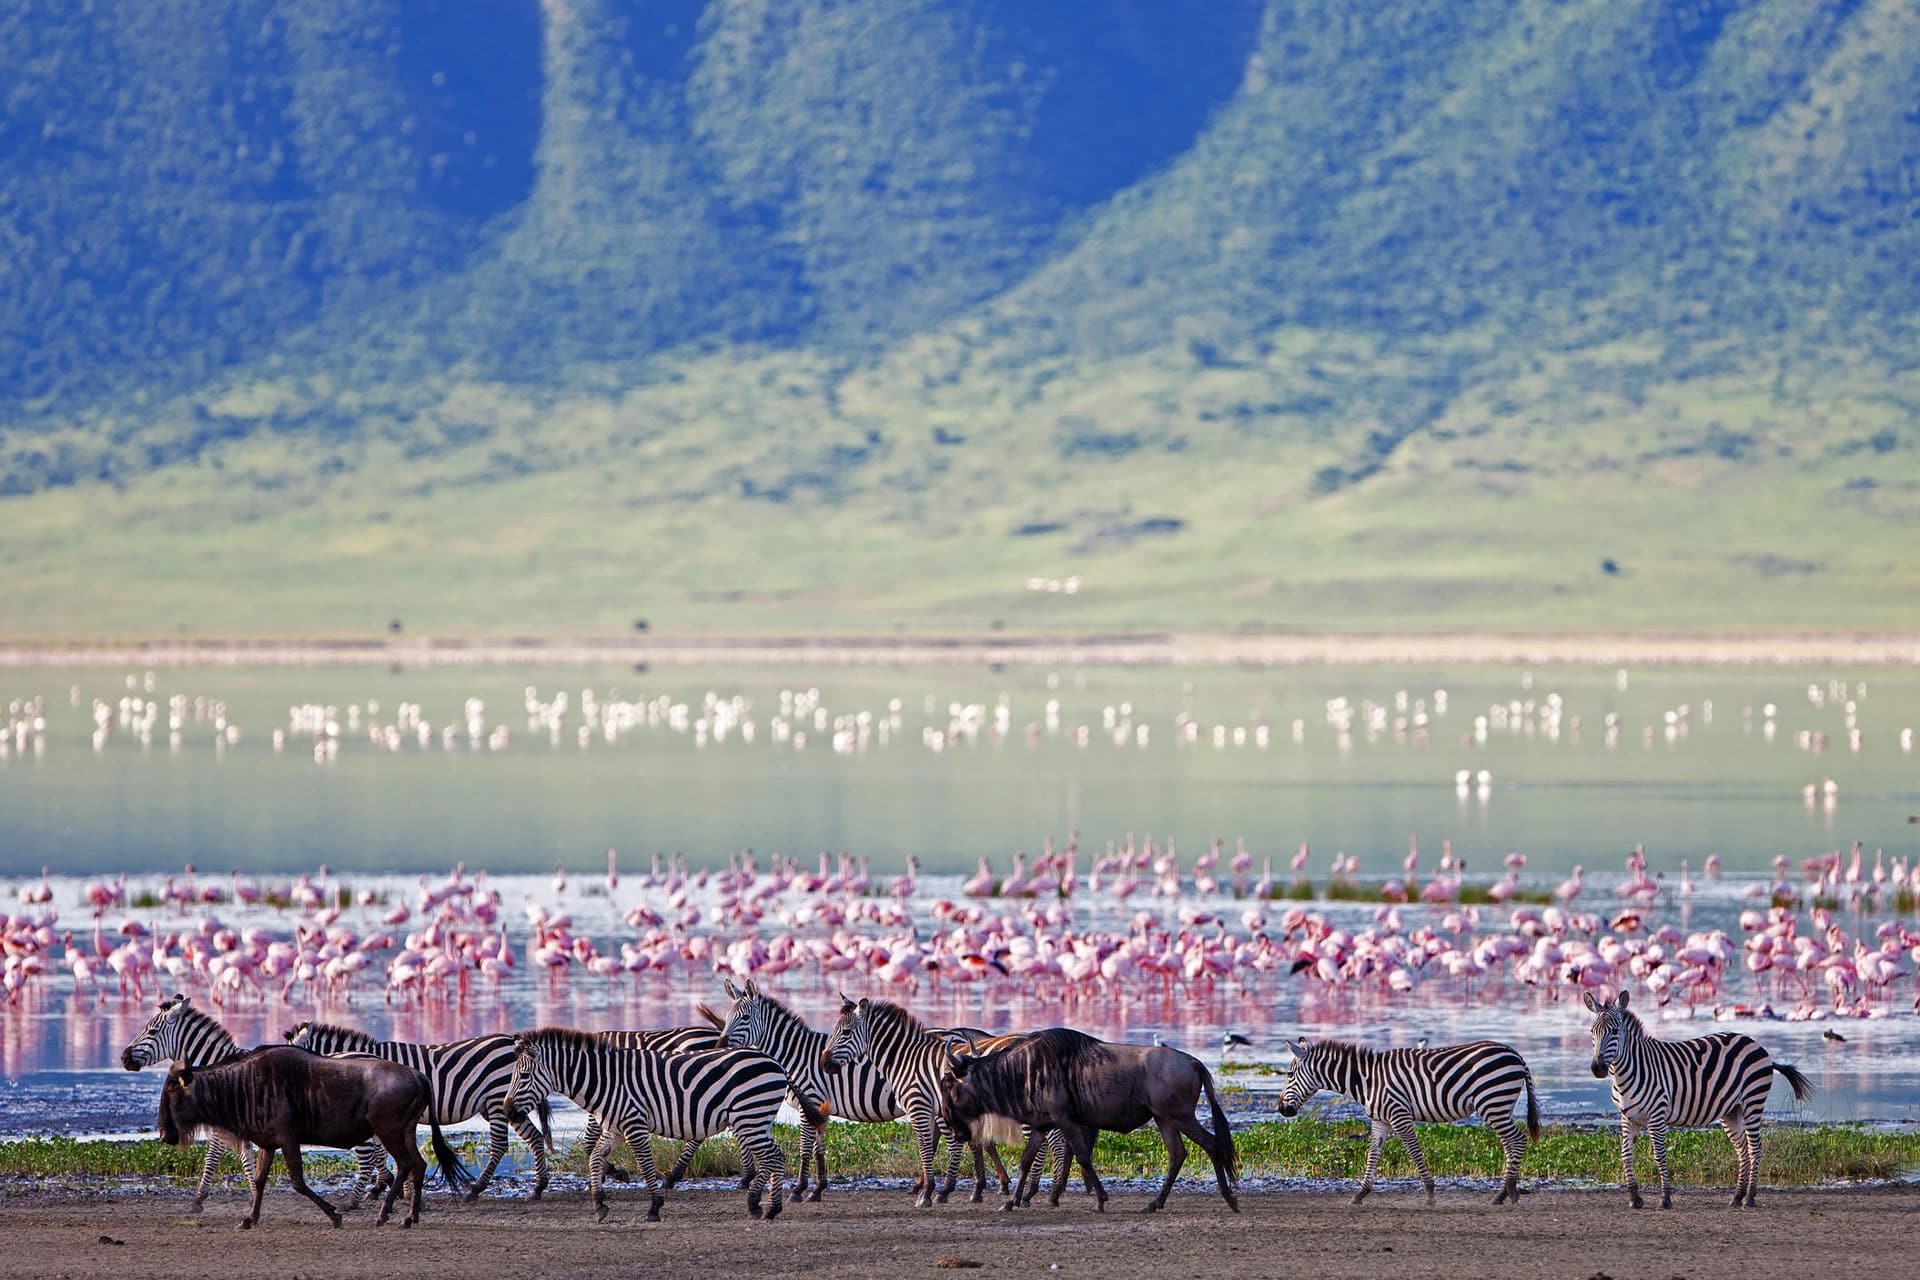 The magnificent Ngorongoro Crater in the Serengeti in Tanzania.